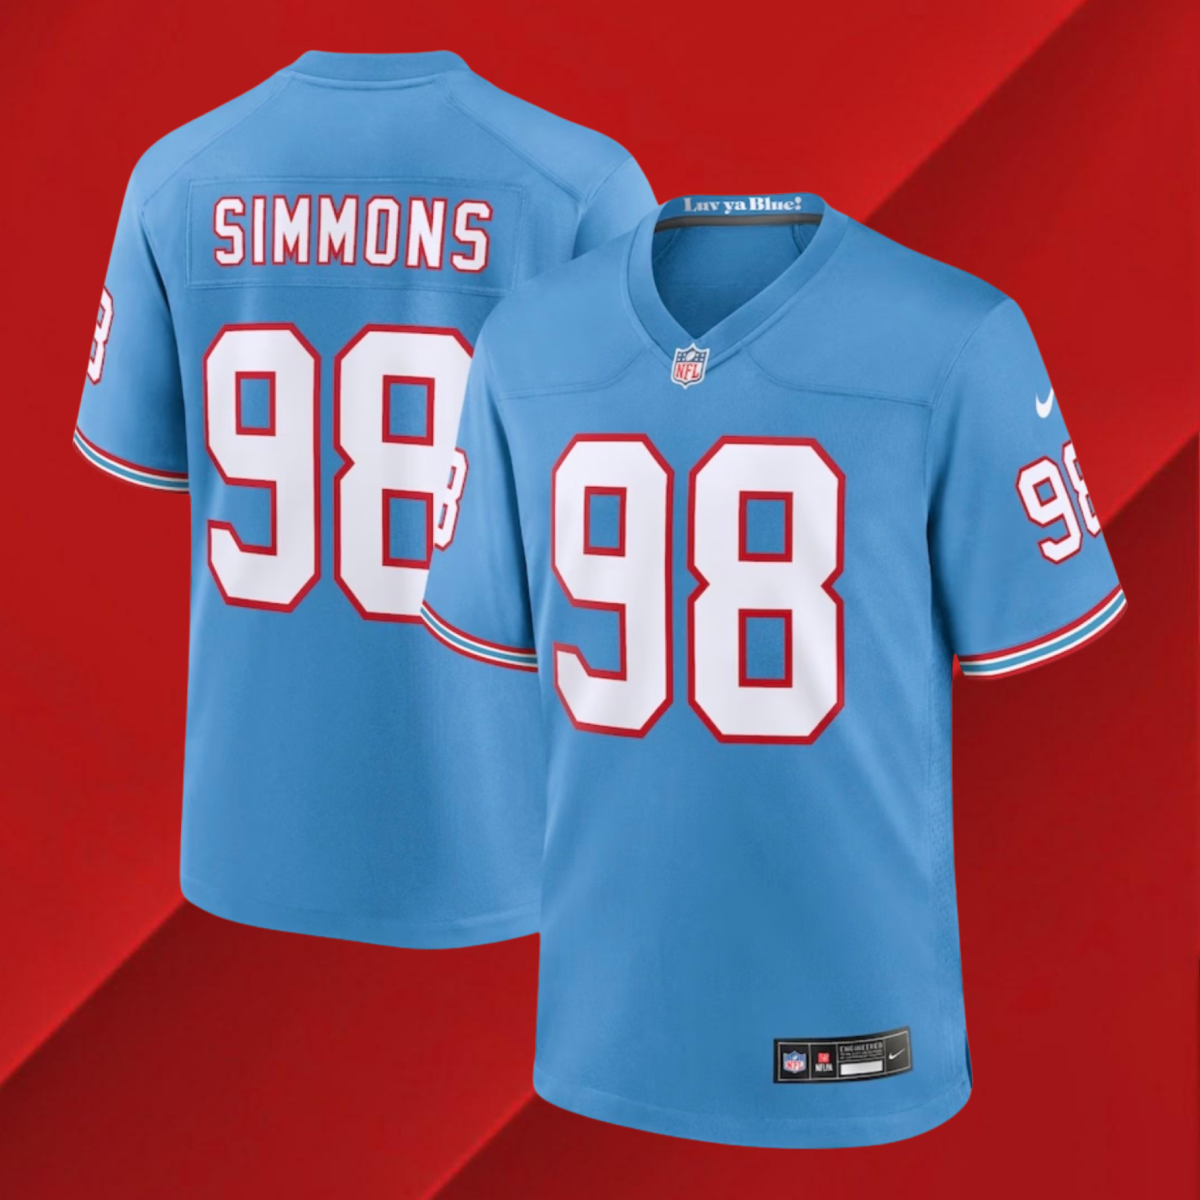 Tennessee Titans debut throwback Houston Oilers uniforms